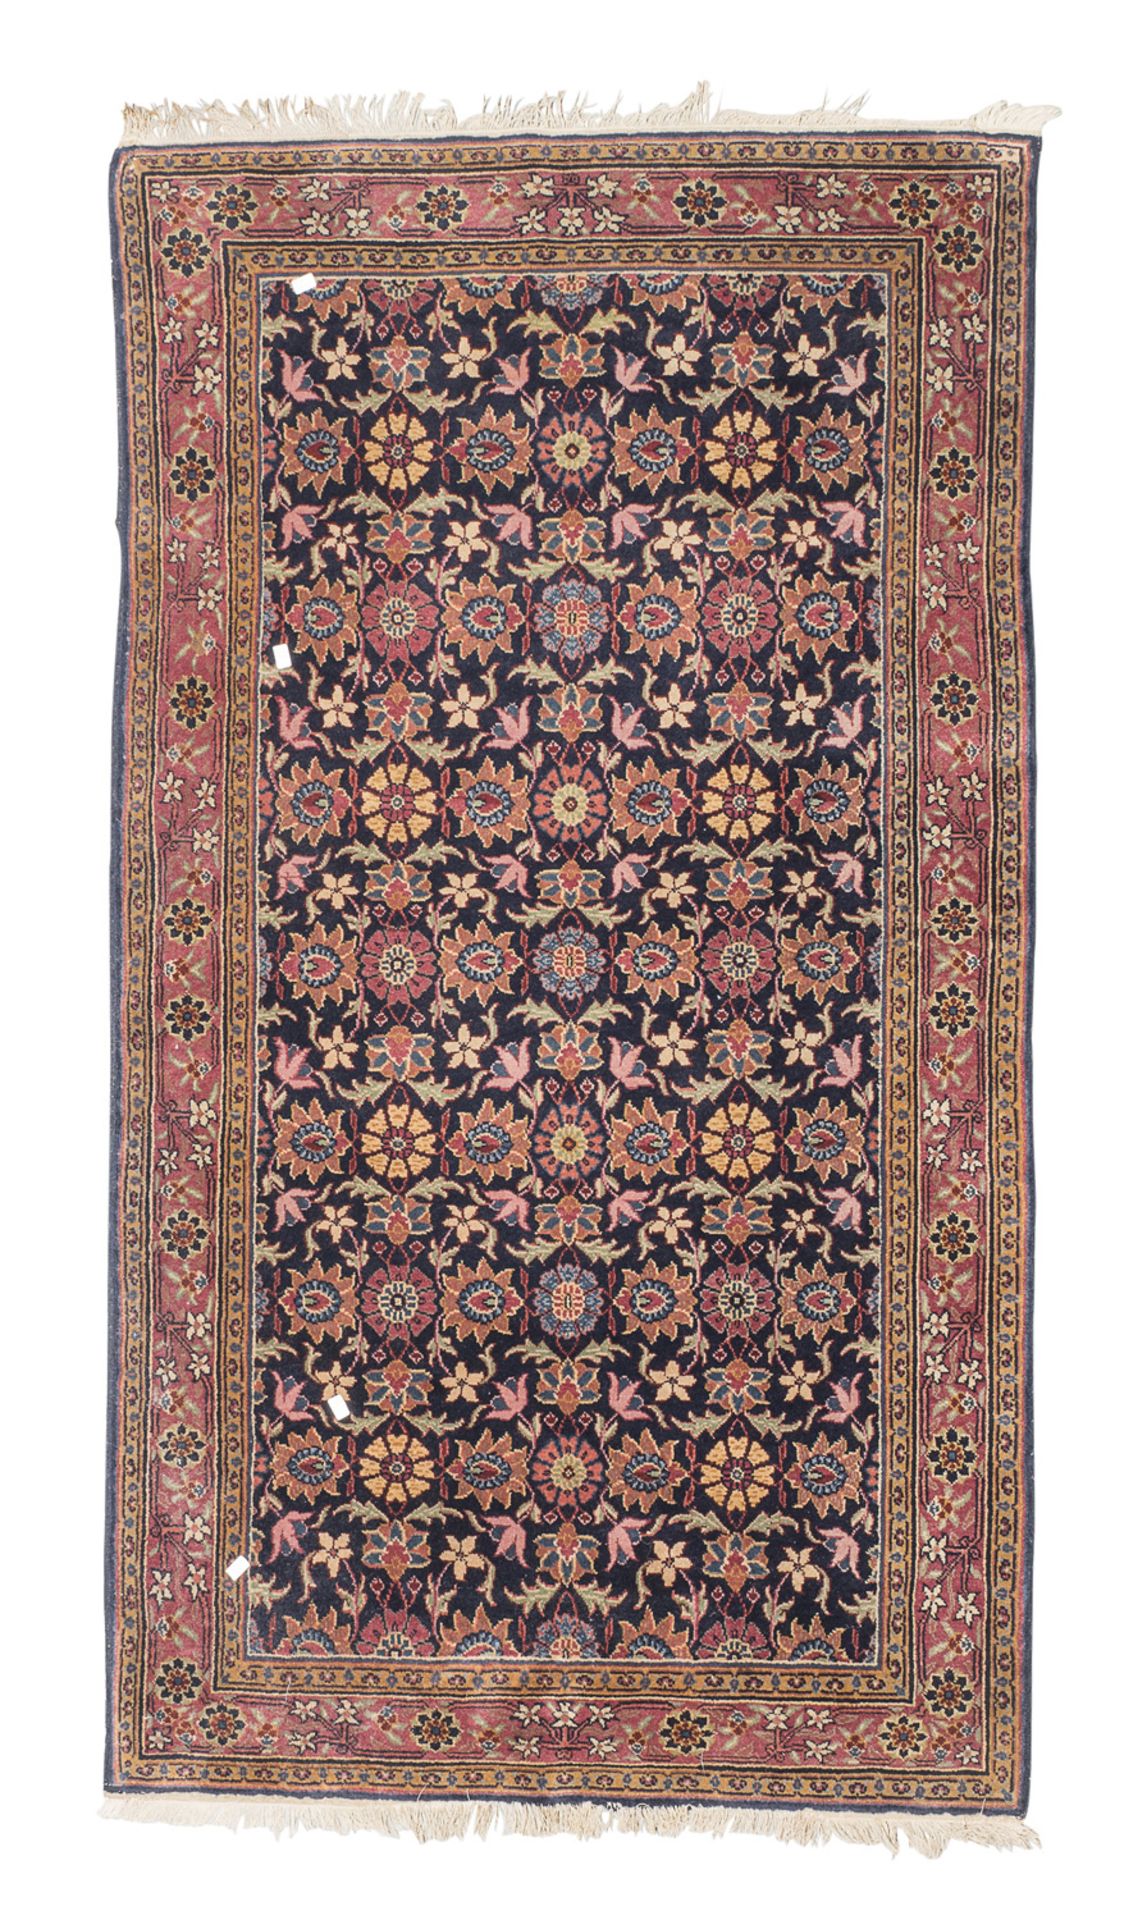 CARPET FROM THE NORTH OF PERSIA MID